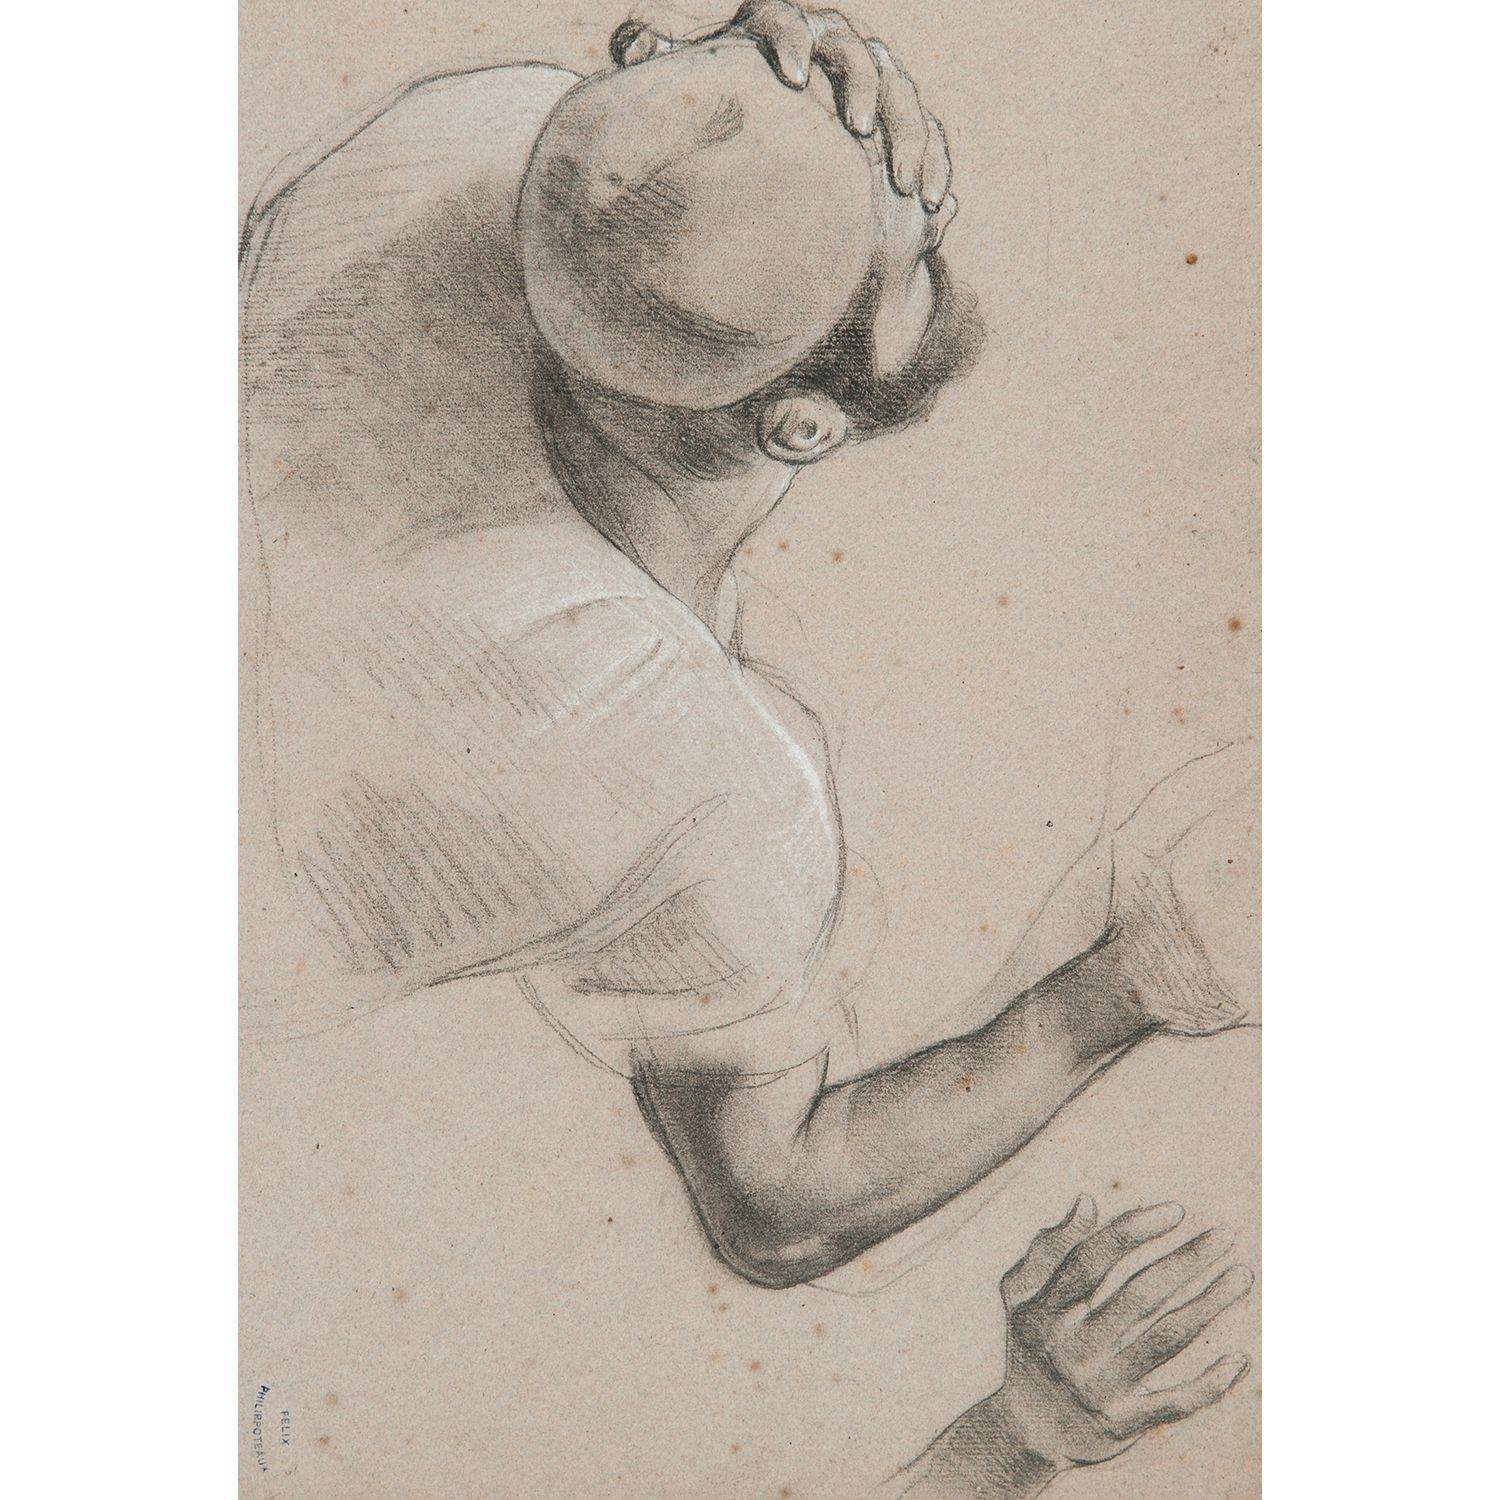 Null HENRI FÉLIX PHILIPPOTEAUX (Paris 1815 - 1884)

STUDY FOR "THE DEFENSE OF MA&hellip;